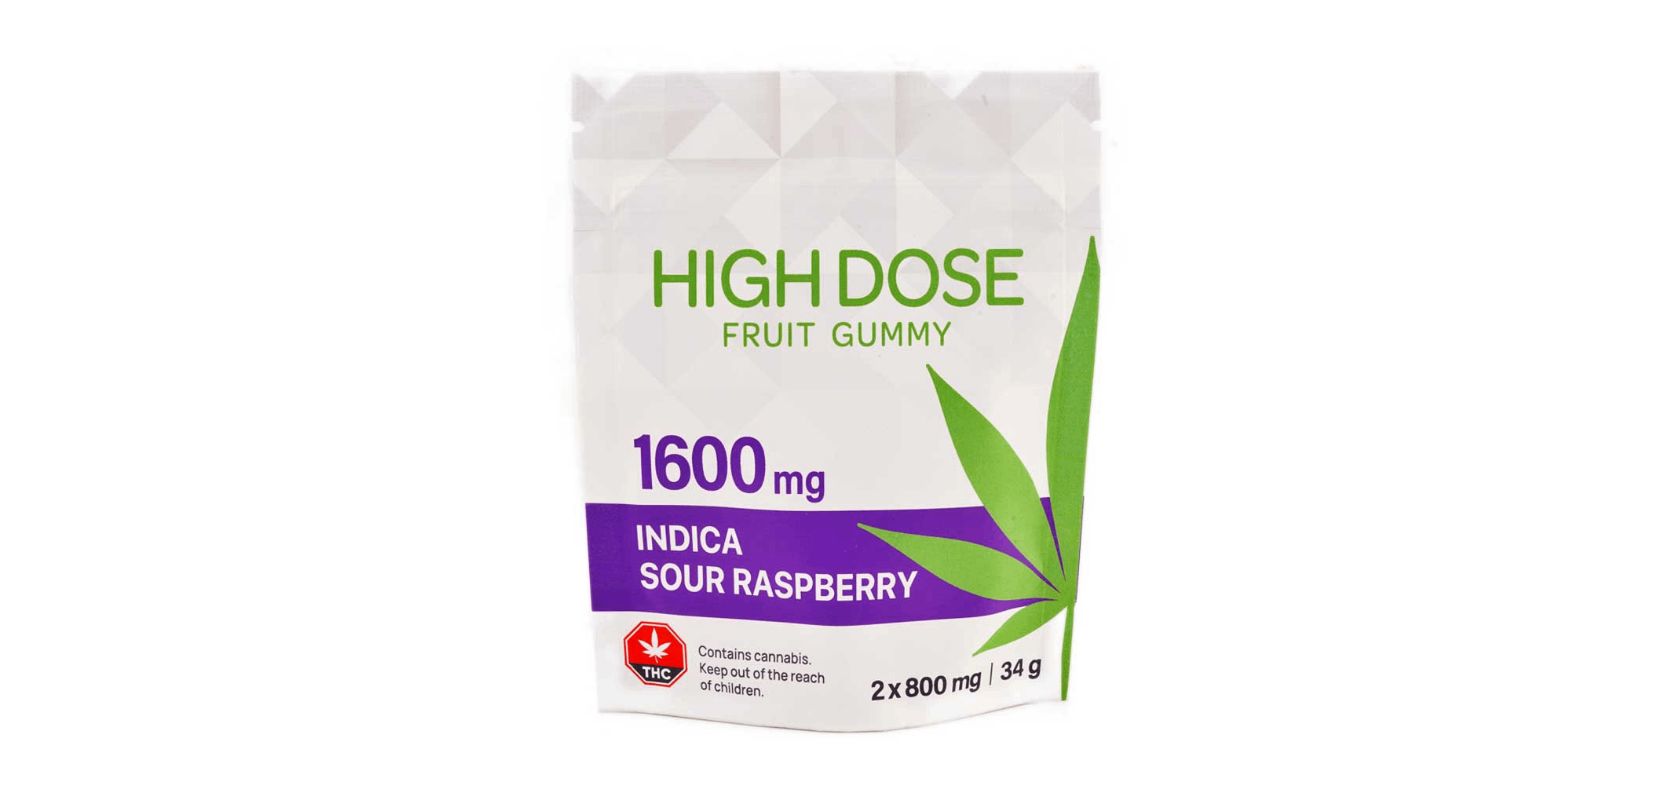 The High Dose Fruit Gummy – Sour Raspberry 1600mg THC (Indica) is an excellent product that is easy to use, convenient, discreet, and effective, just like cannabis pills. 